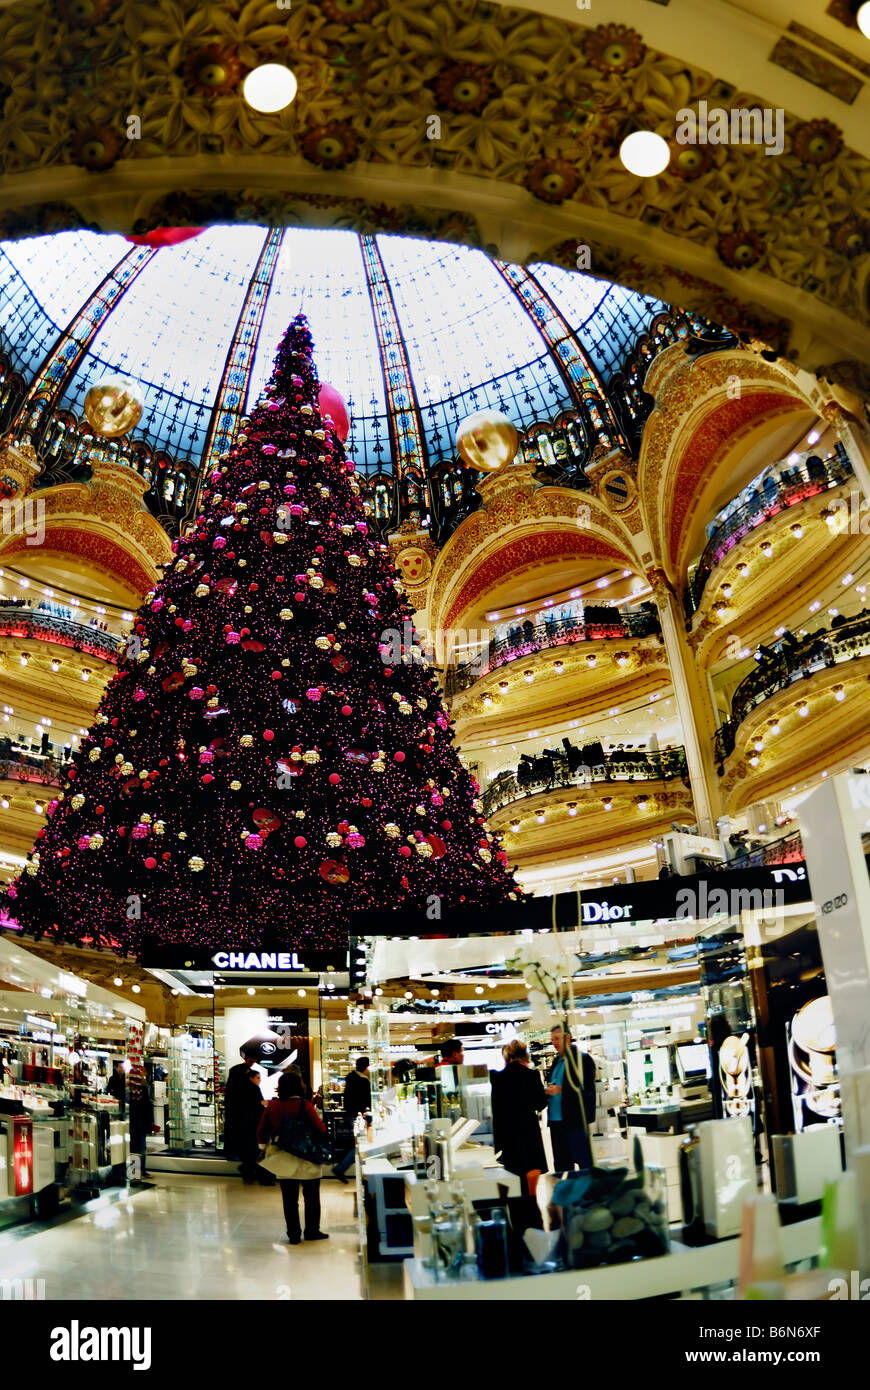 Paris, France, Shopping inside French Department Store, Living